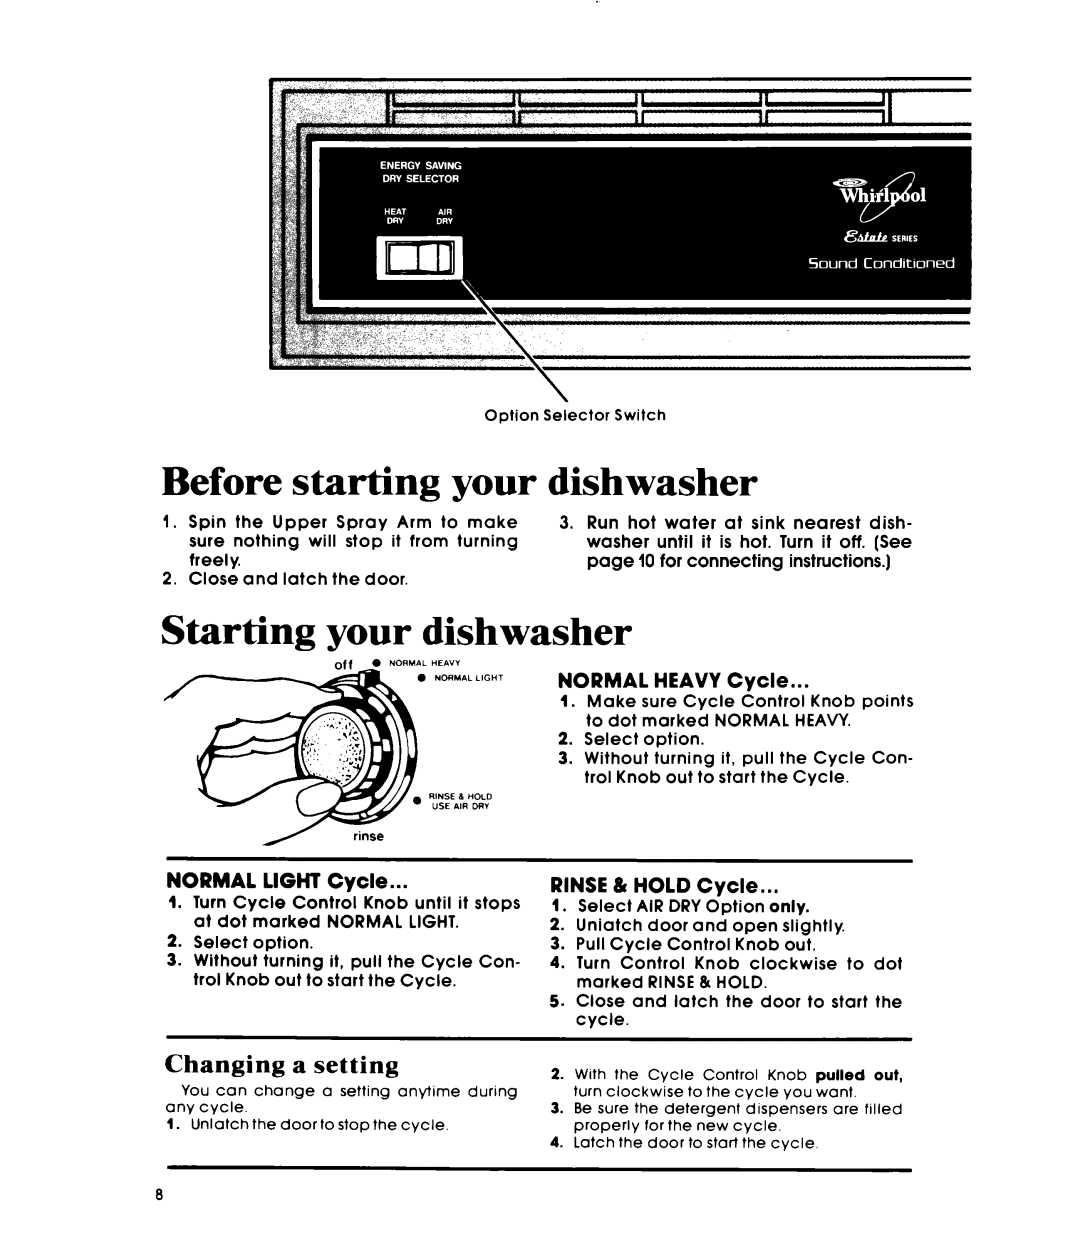 Whirlpool DP3840XP manual Before starting your, Starting your dishwasher, Changing a setting, NORMAL HEAVY Cycle 